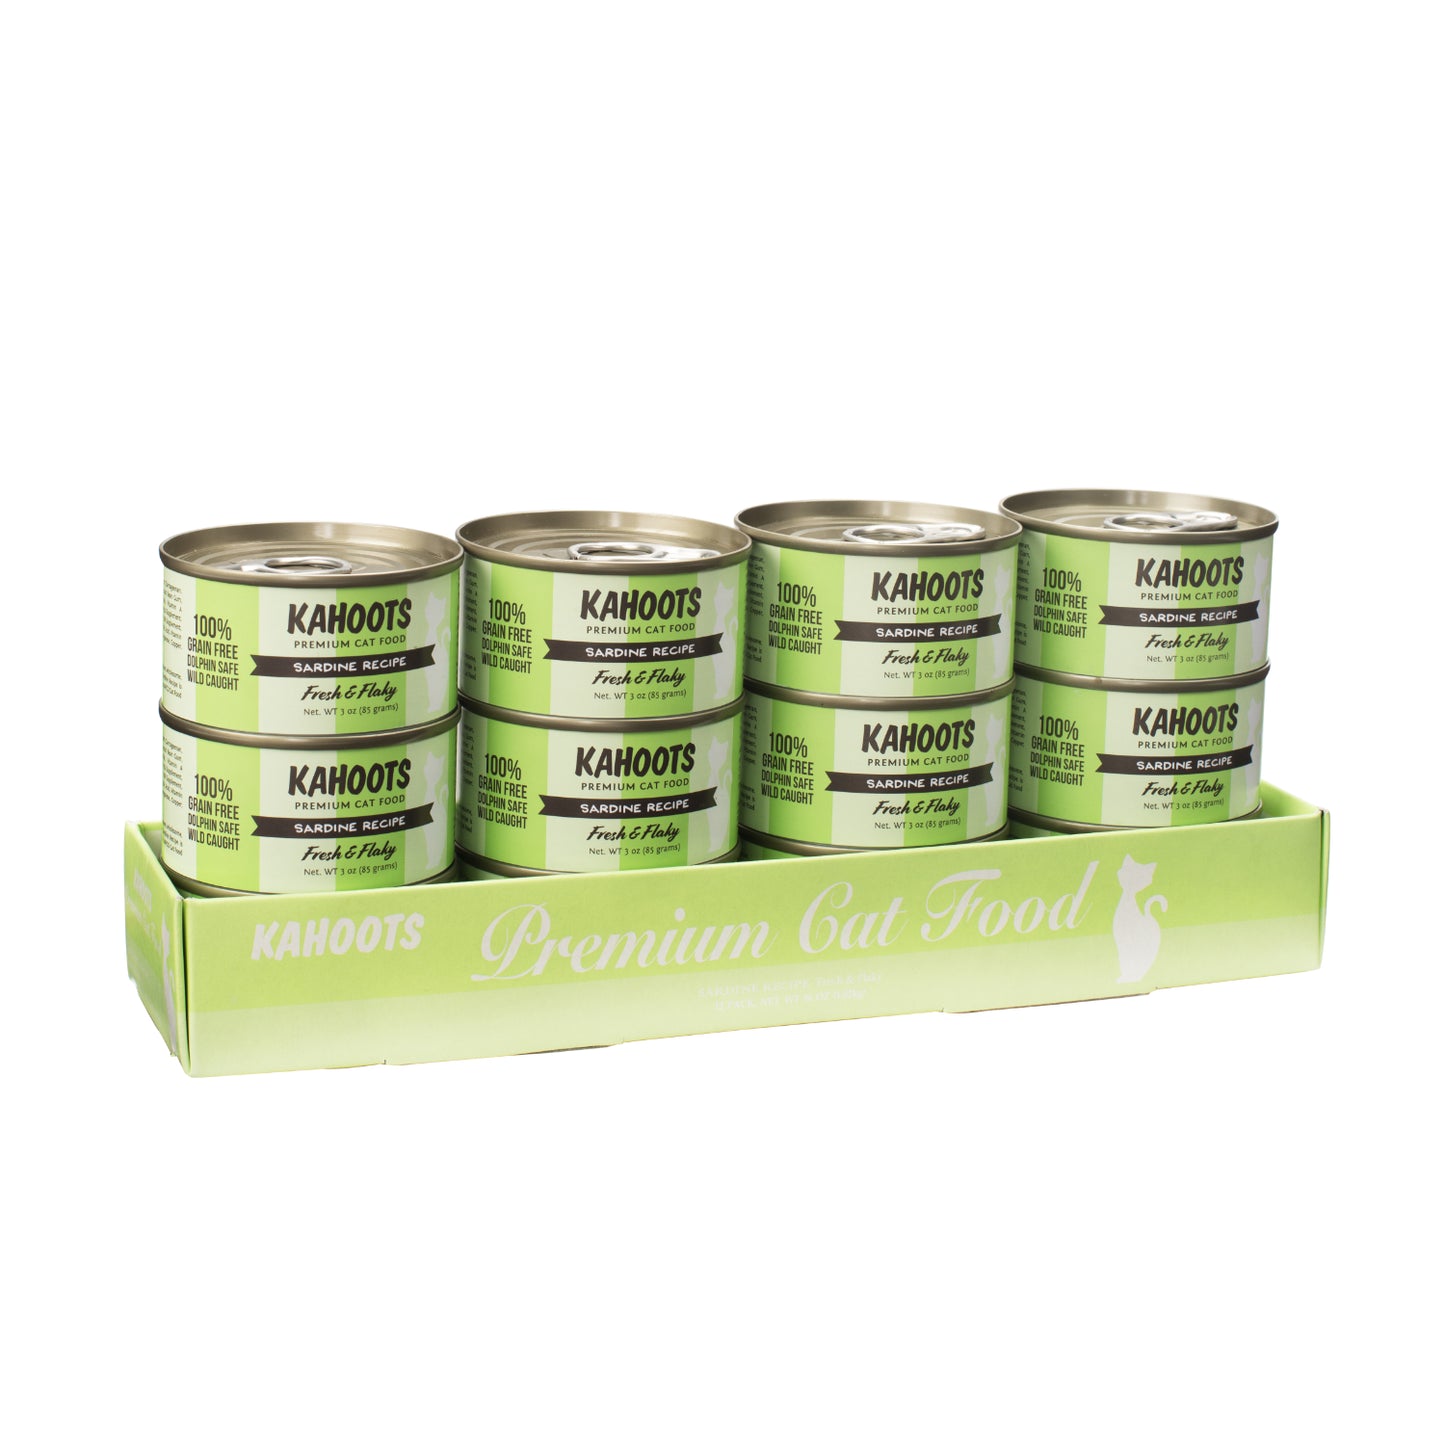 Case quantity of Sardine wet cat food. White cat over green colored striped background on the label